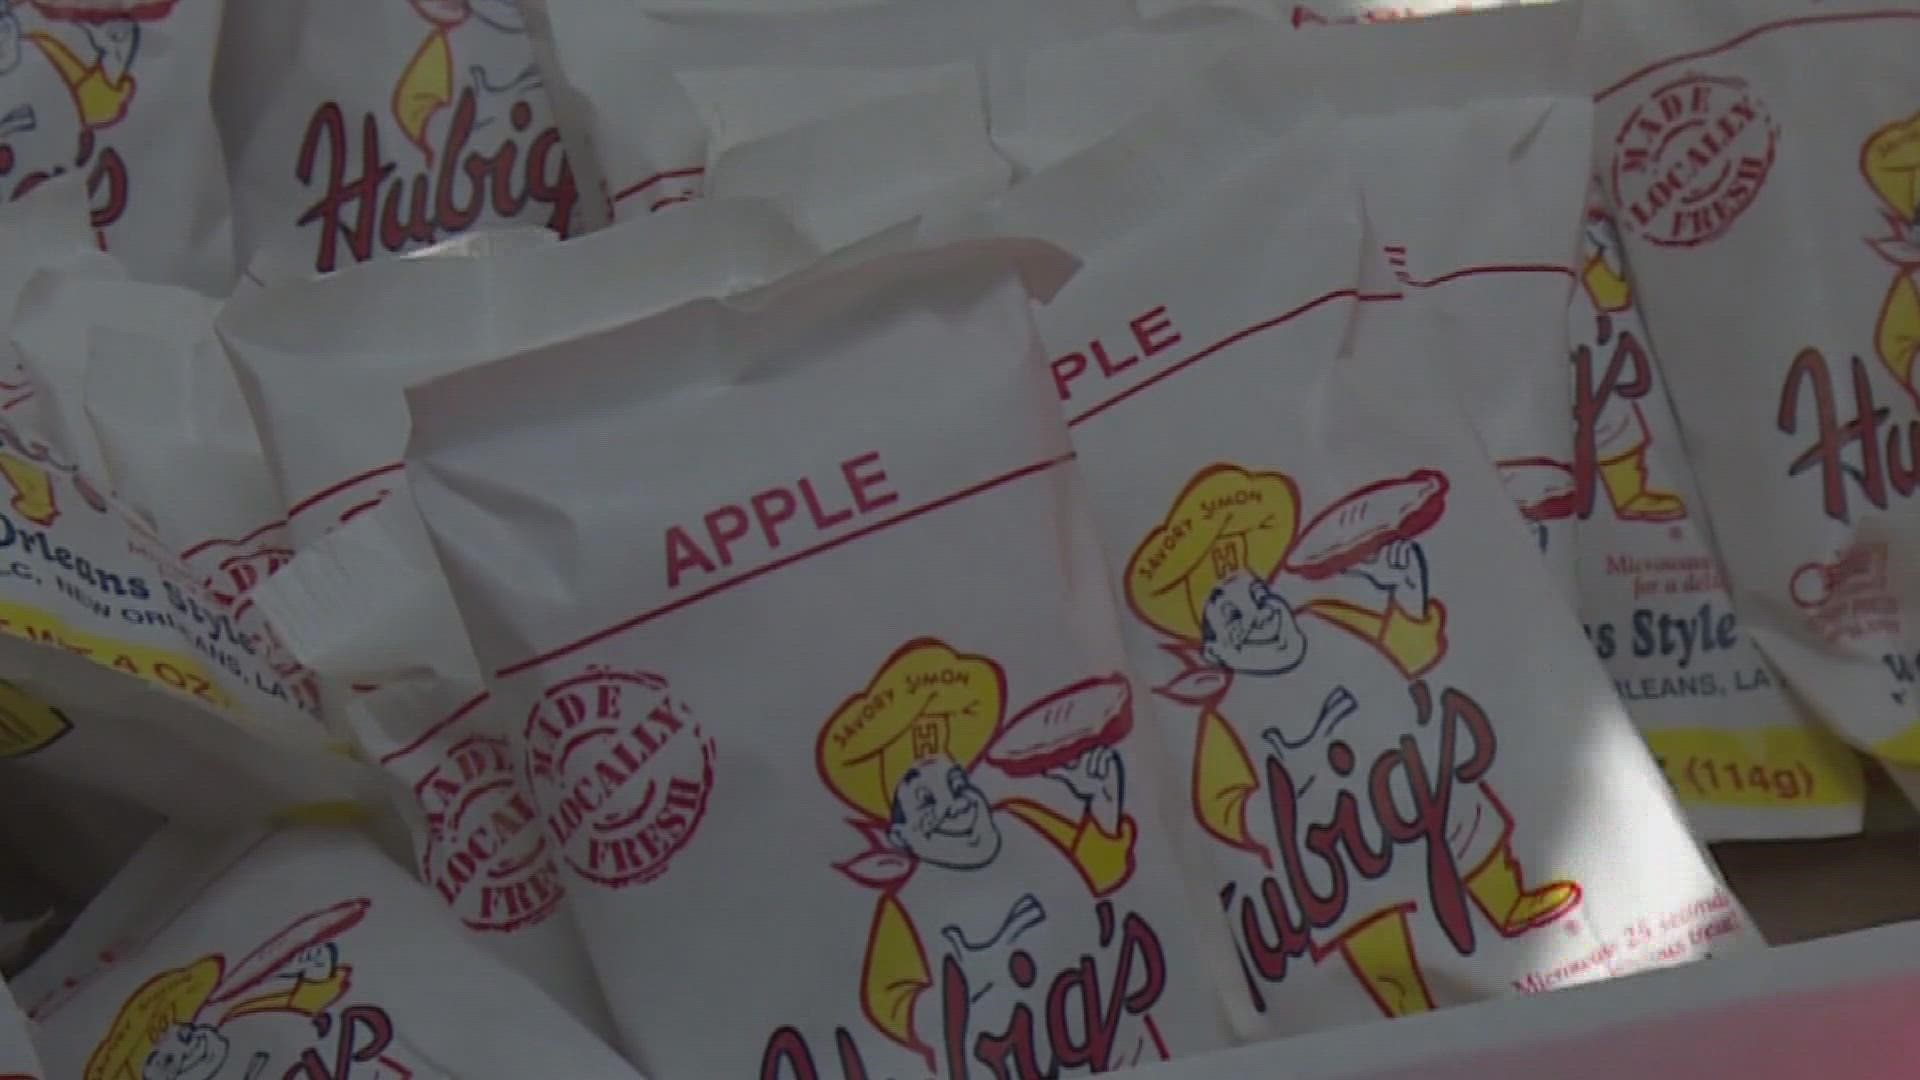 Hubig’s Pies are now expected to sell for about $2.50 a pie.